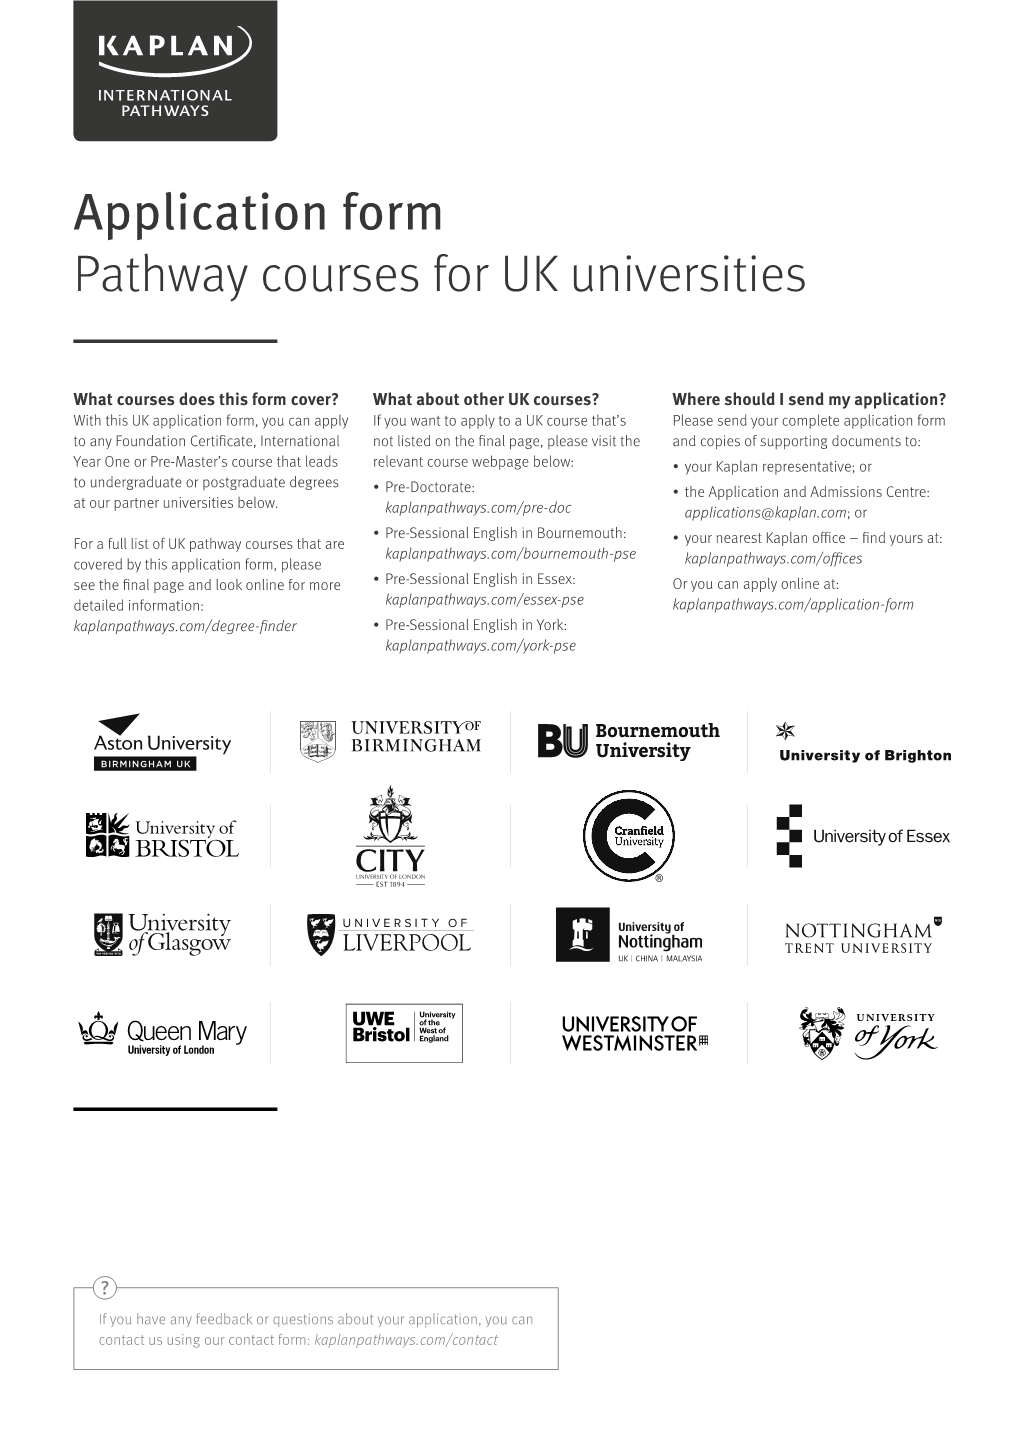 Application Form Pathway Courses for UK Universities